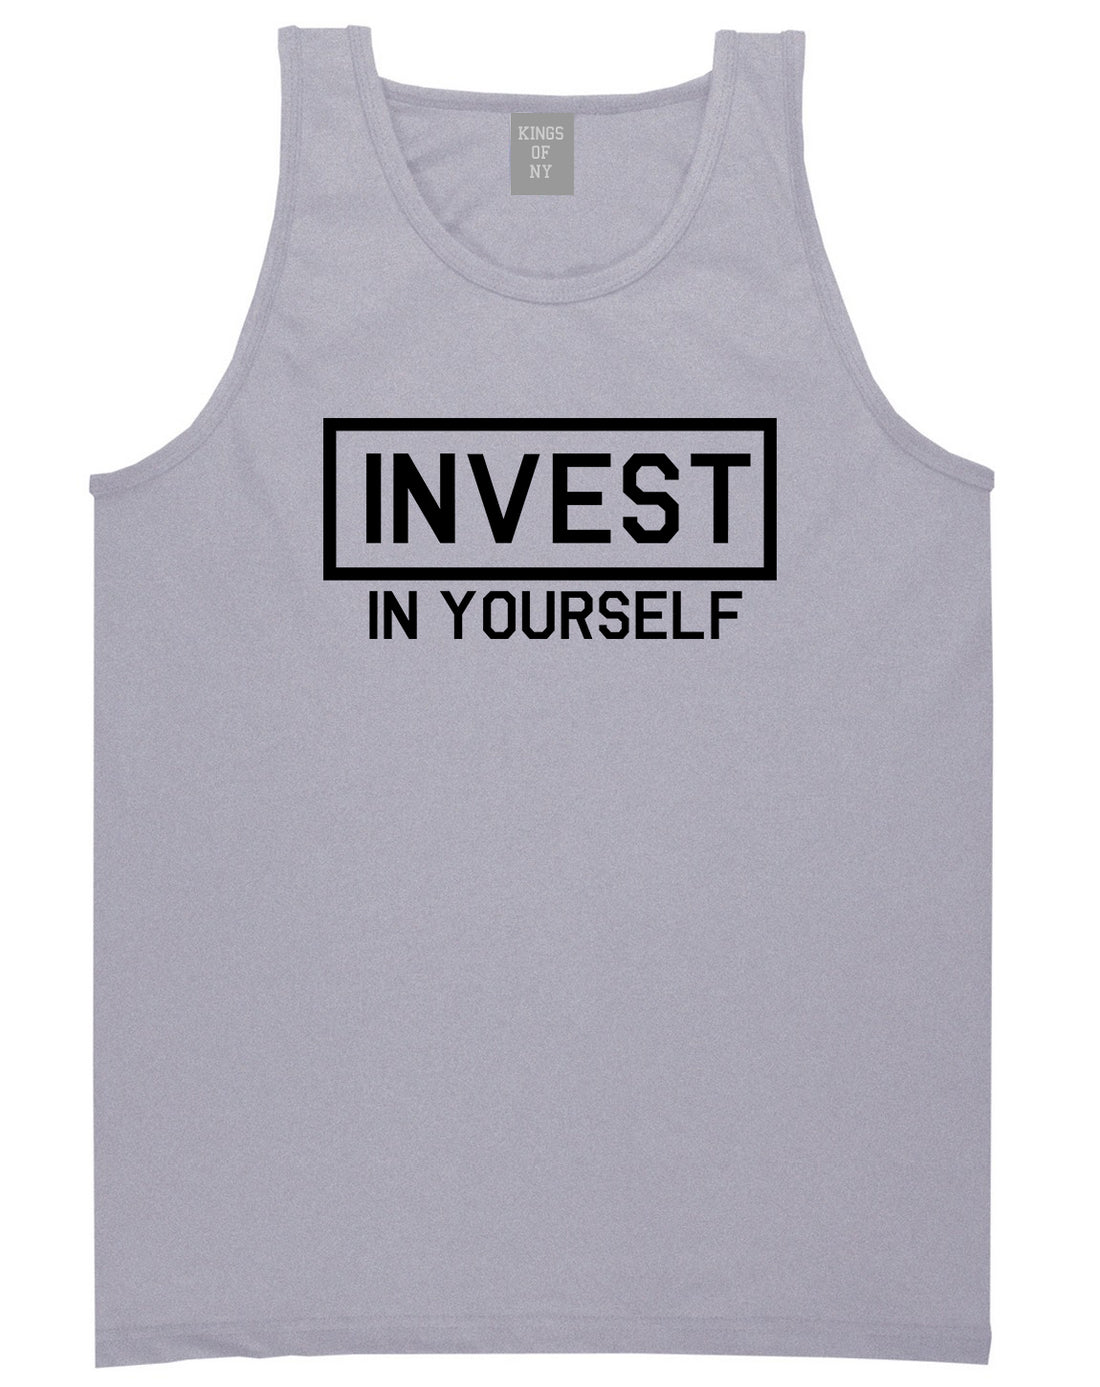 Invest In Yourself Mens Tank Top T-Shirt Grey